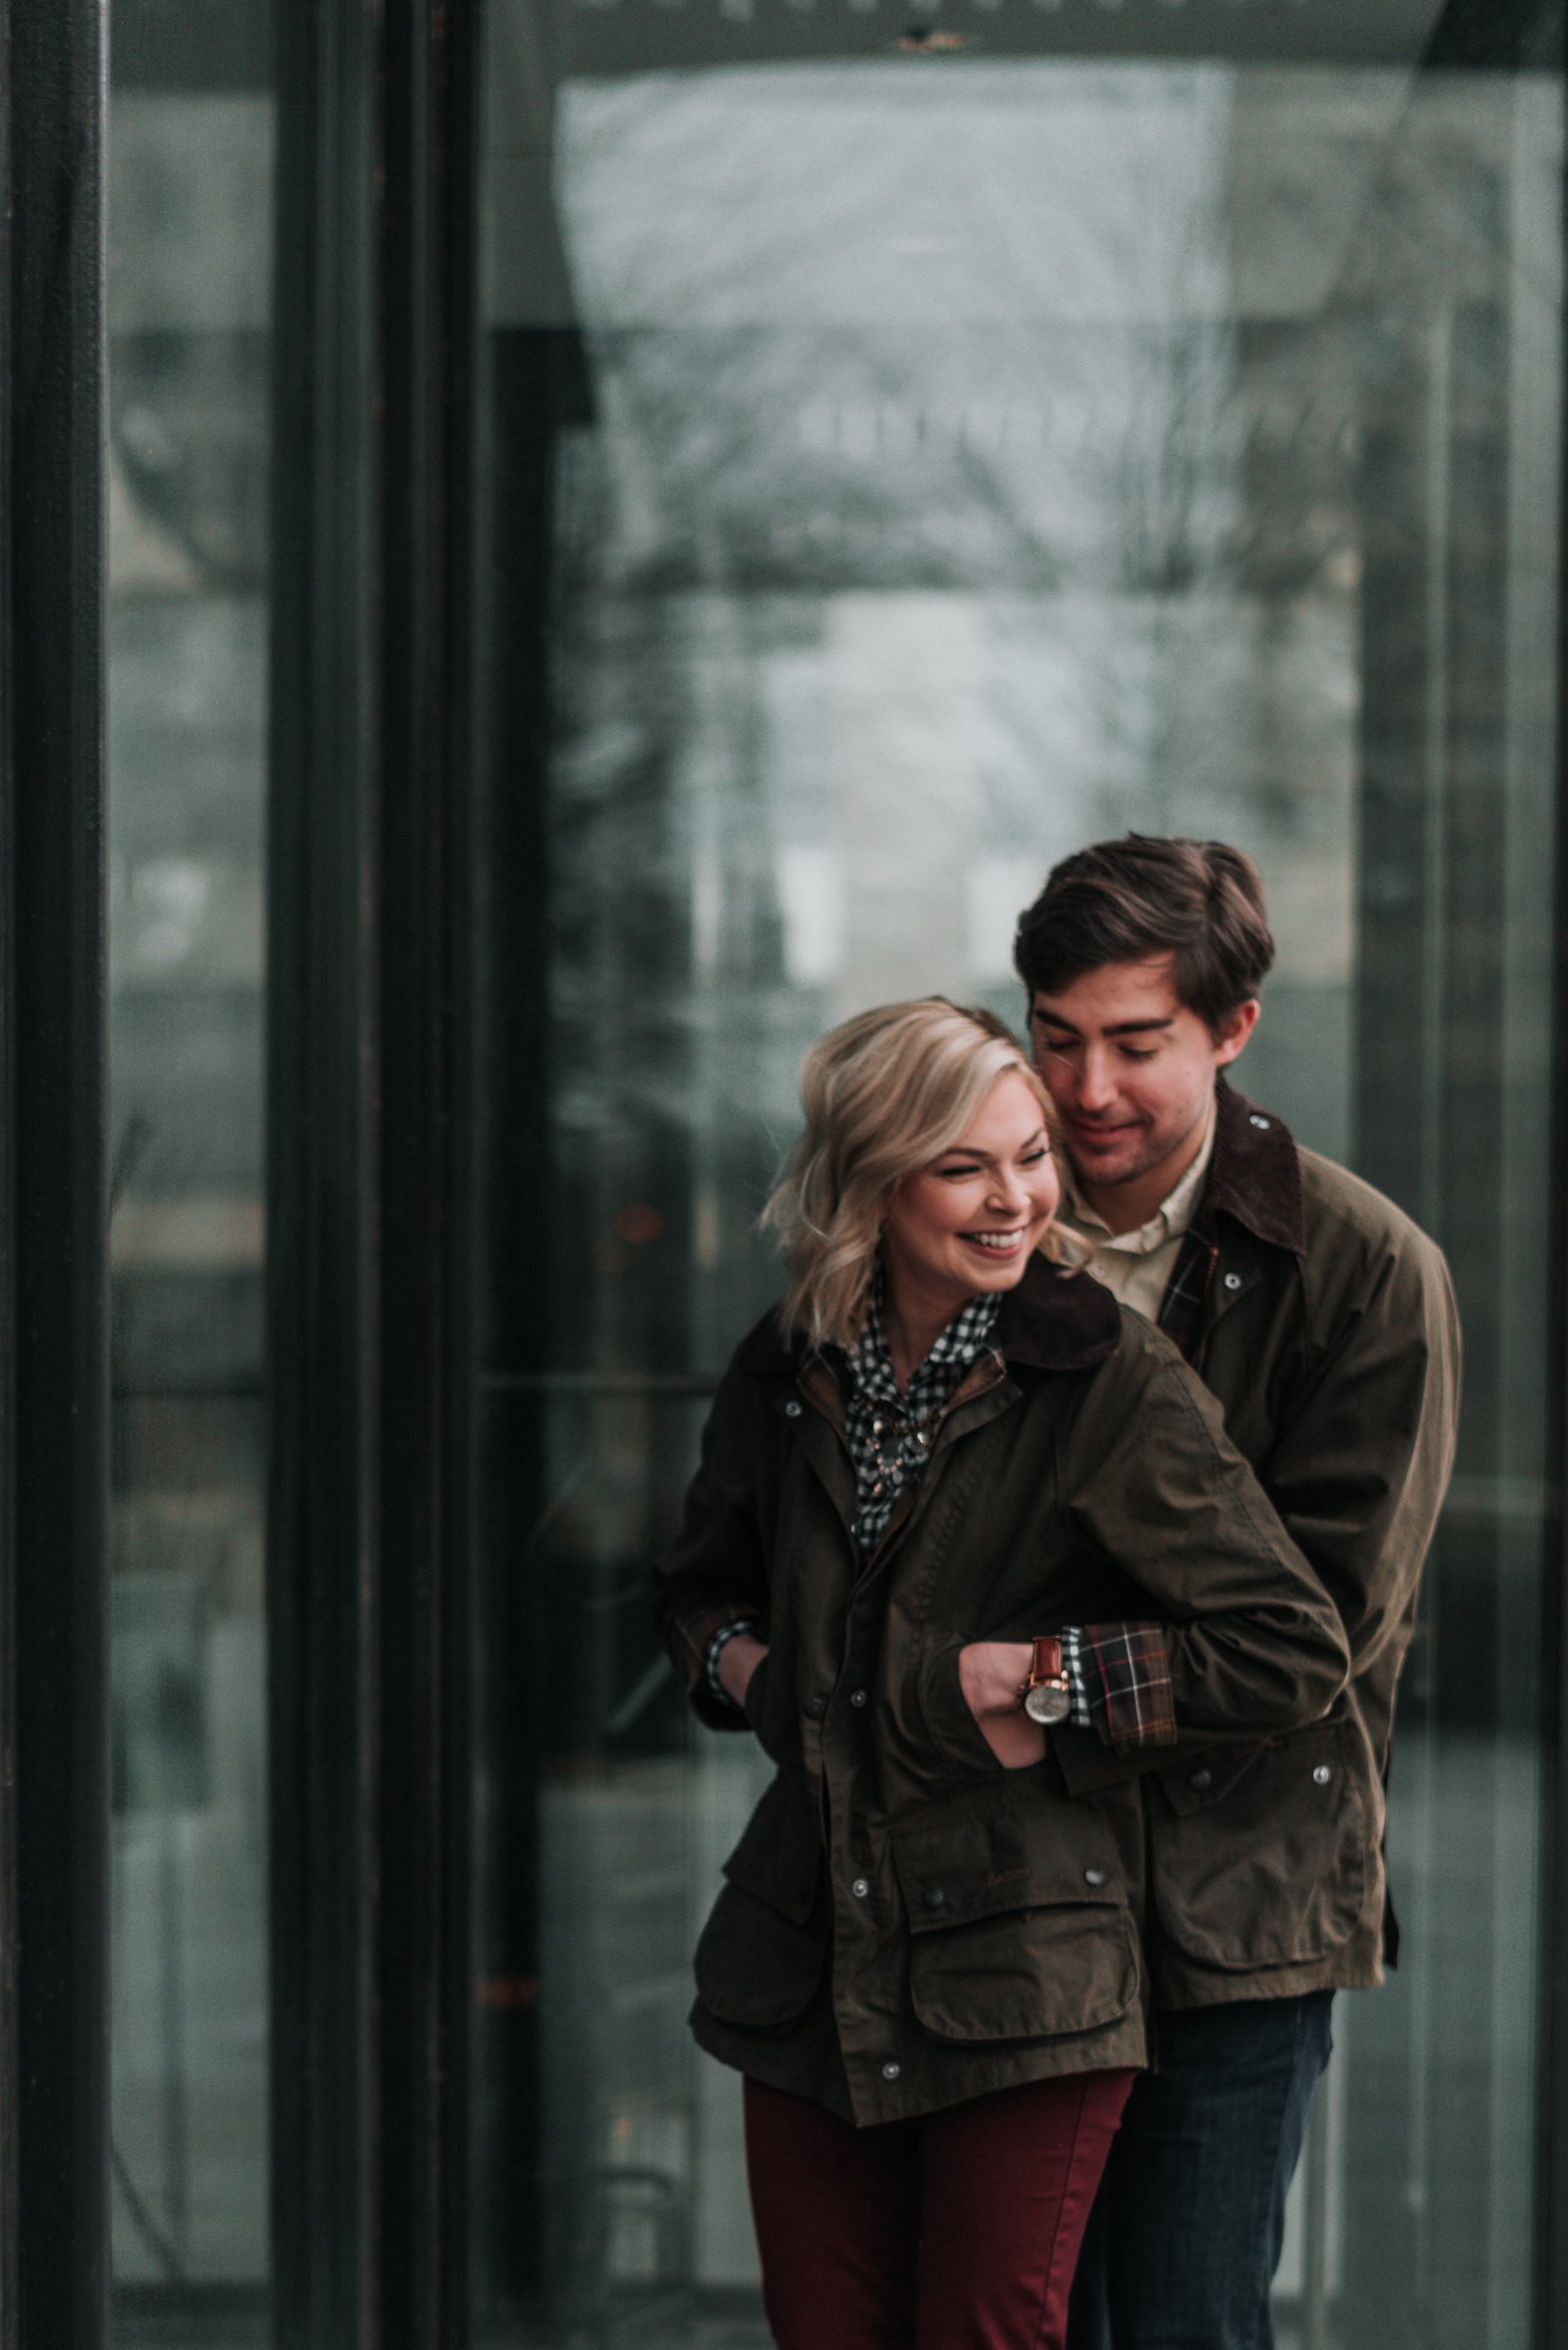 Bride to be laughs as her fiancé hugs her tight from behind at the Peabody Office Building in downtown St. Louis during their winter engagement photo session.